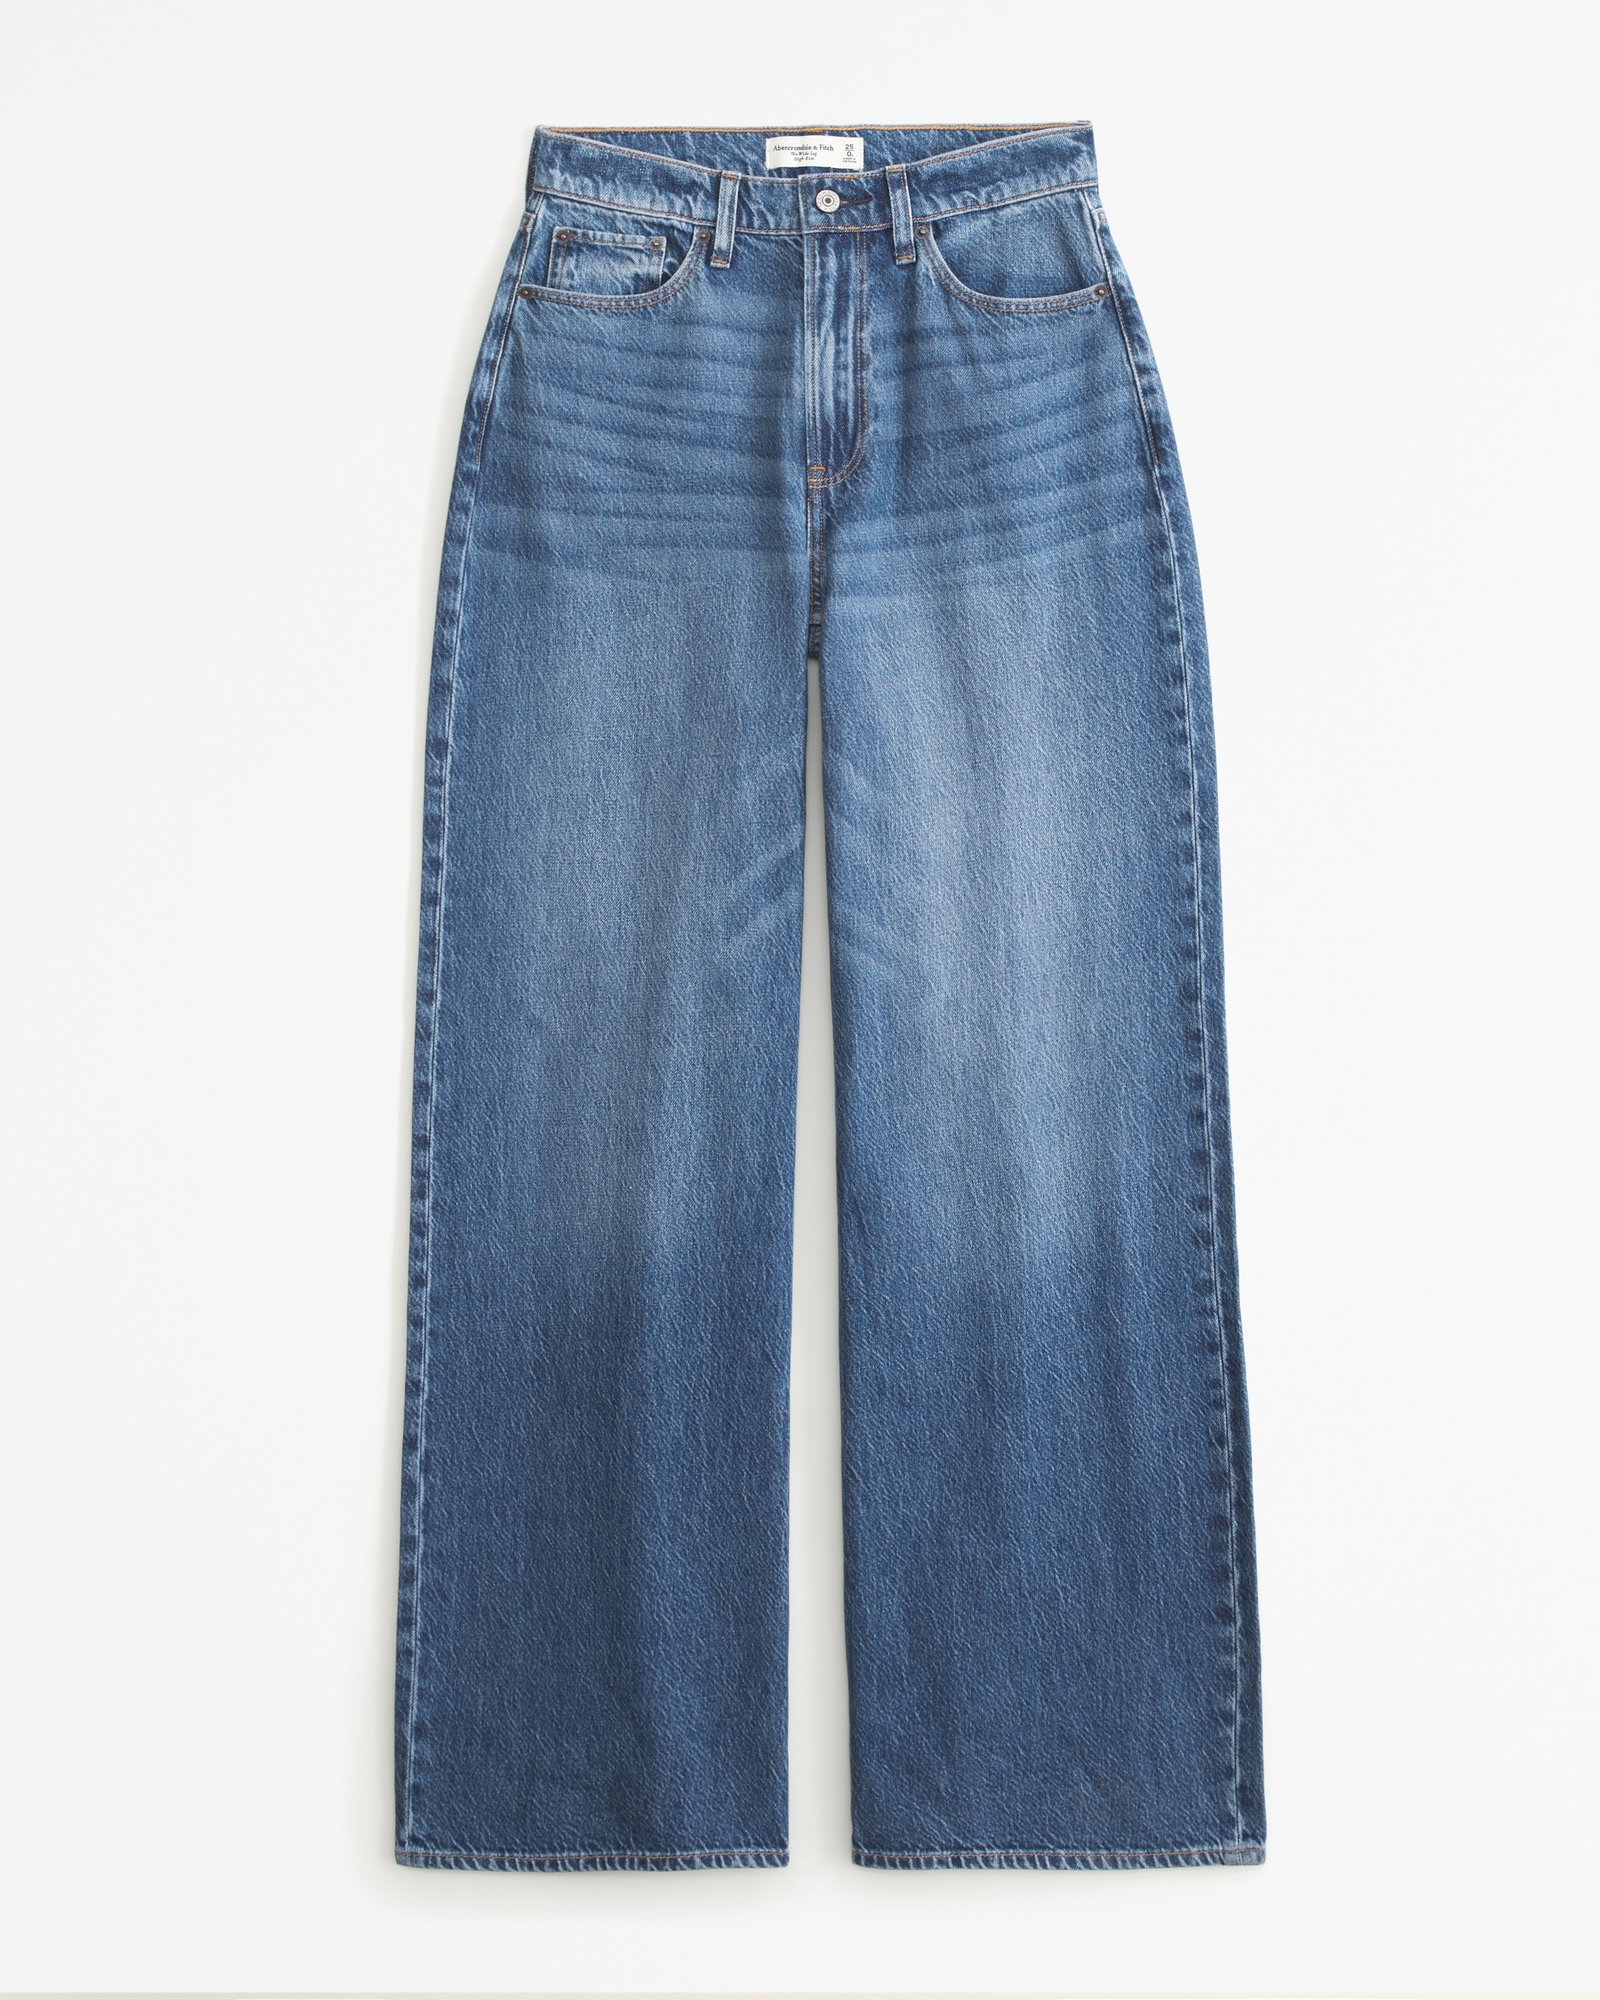 Flared - Trousers - Clothing - Woman - PULL&BEAR Ireland